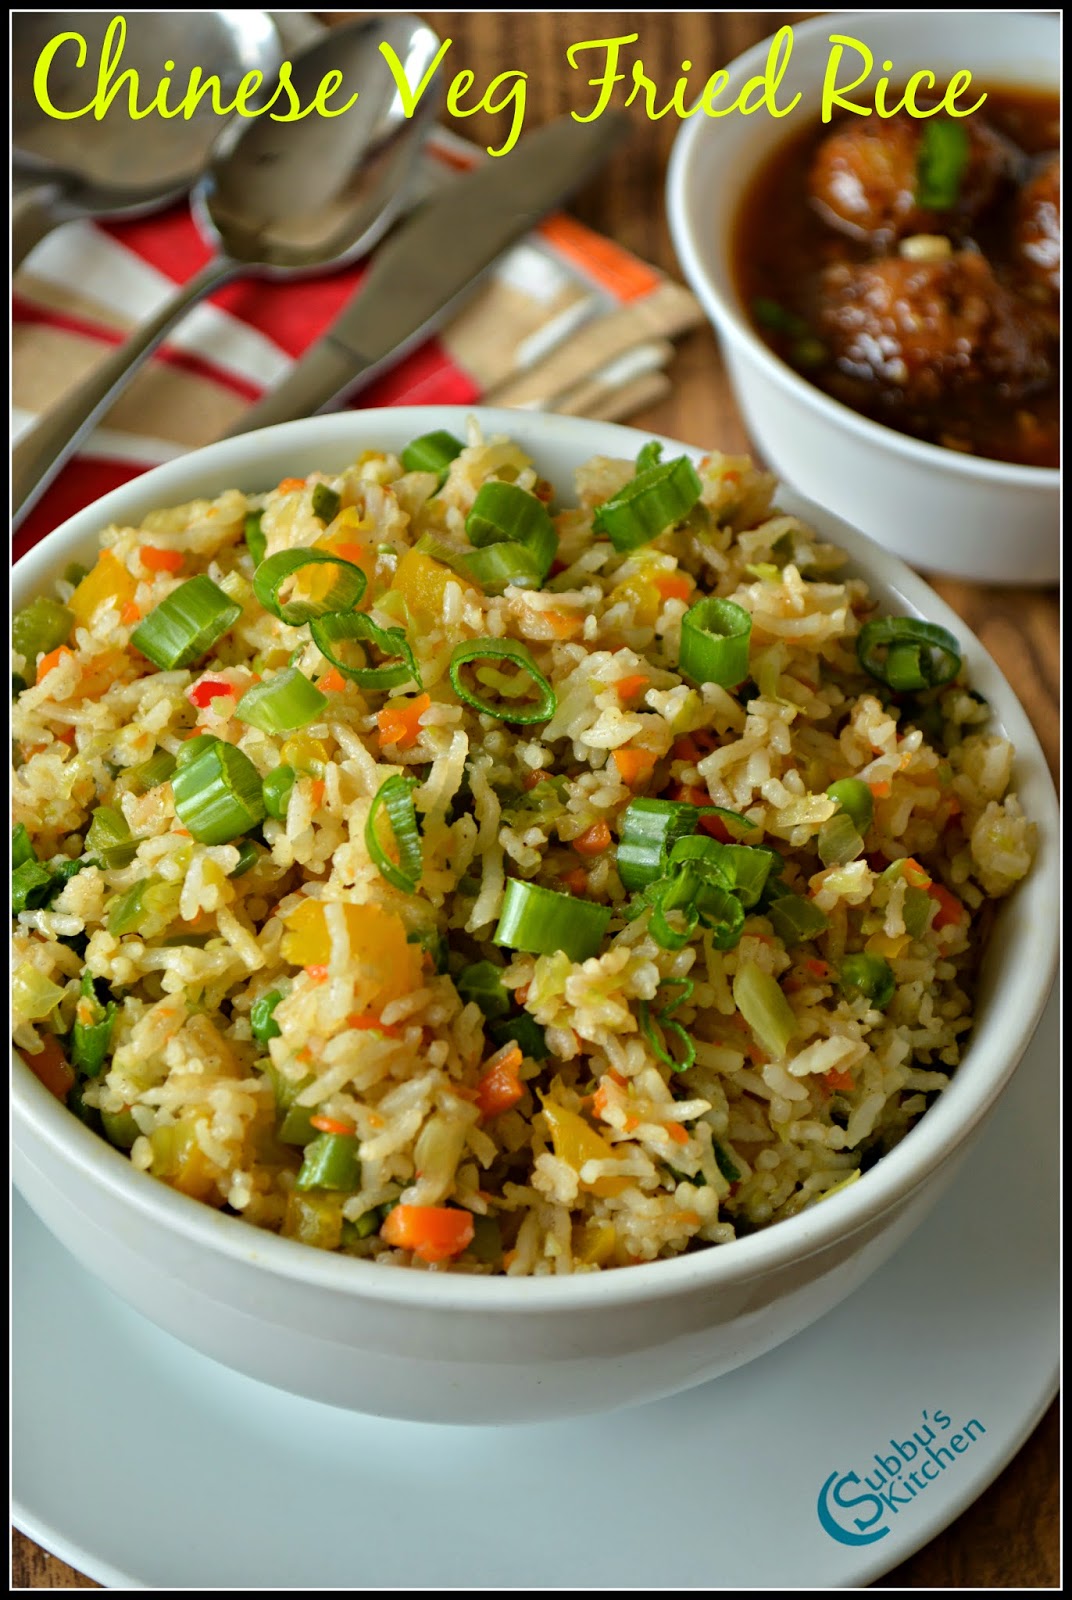 Chinese Vegetable Fried Rice Recipe - Subbus Kitchen